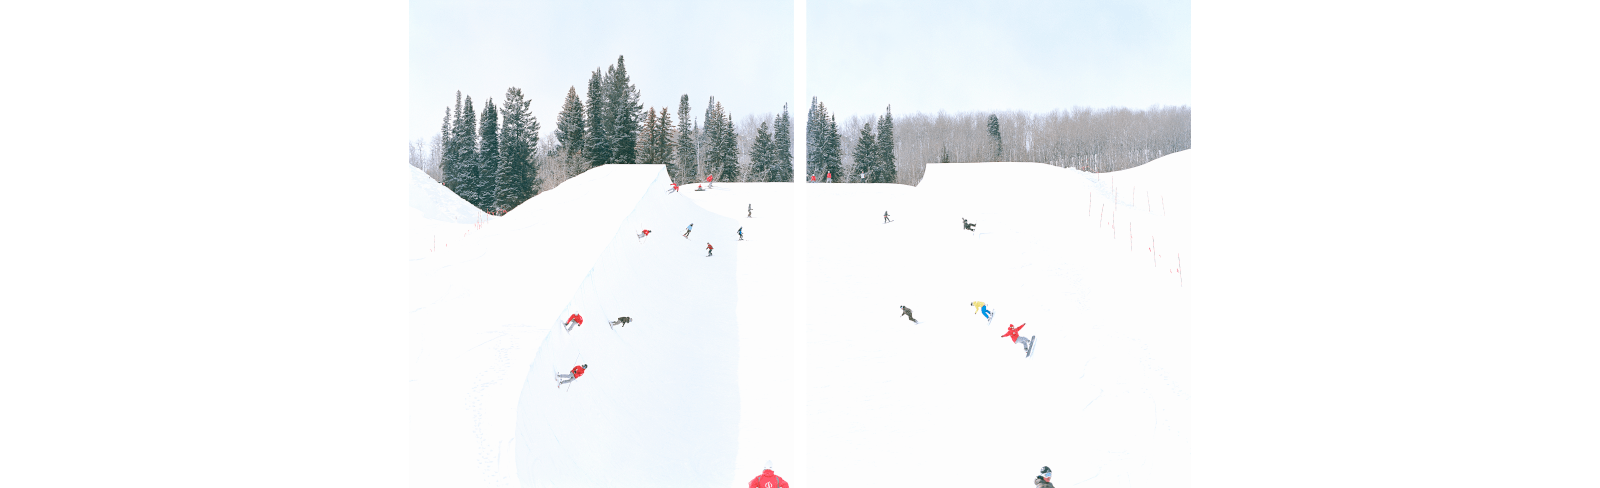 a collage of people skiing down a slope